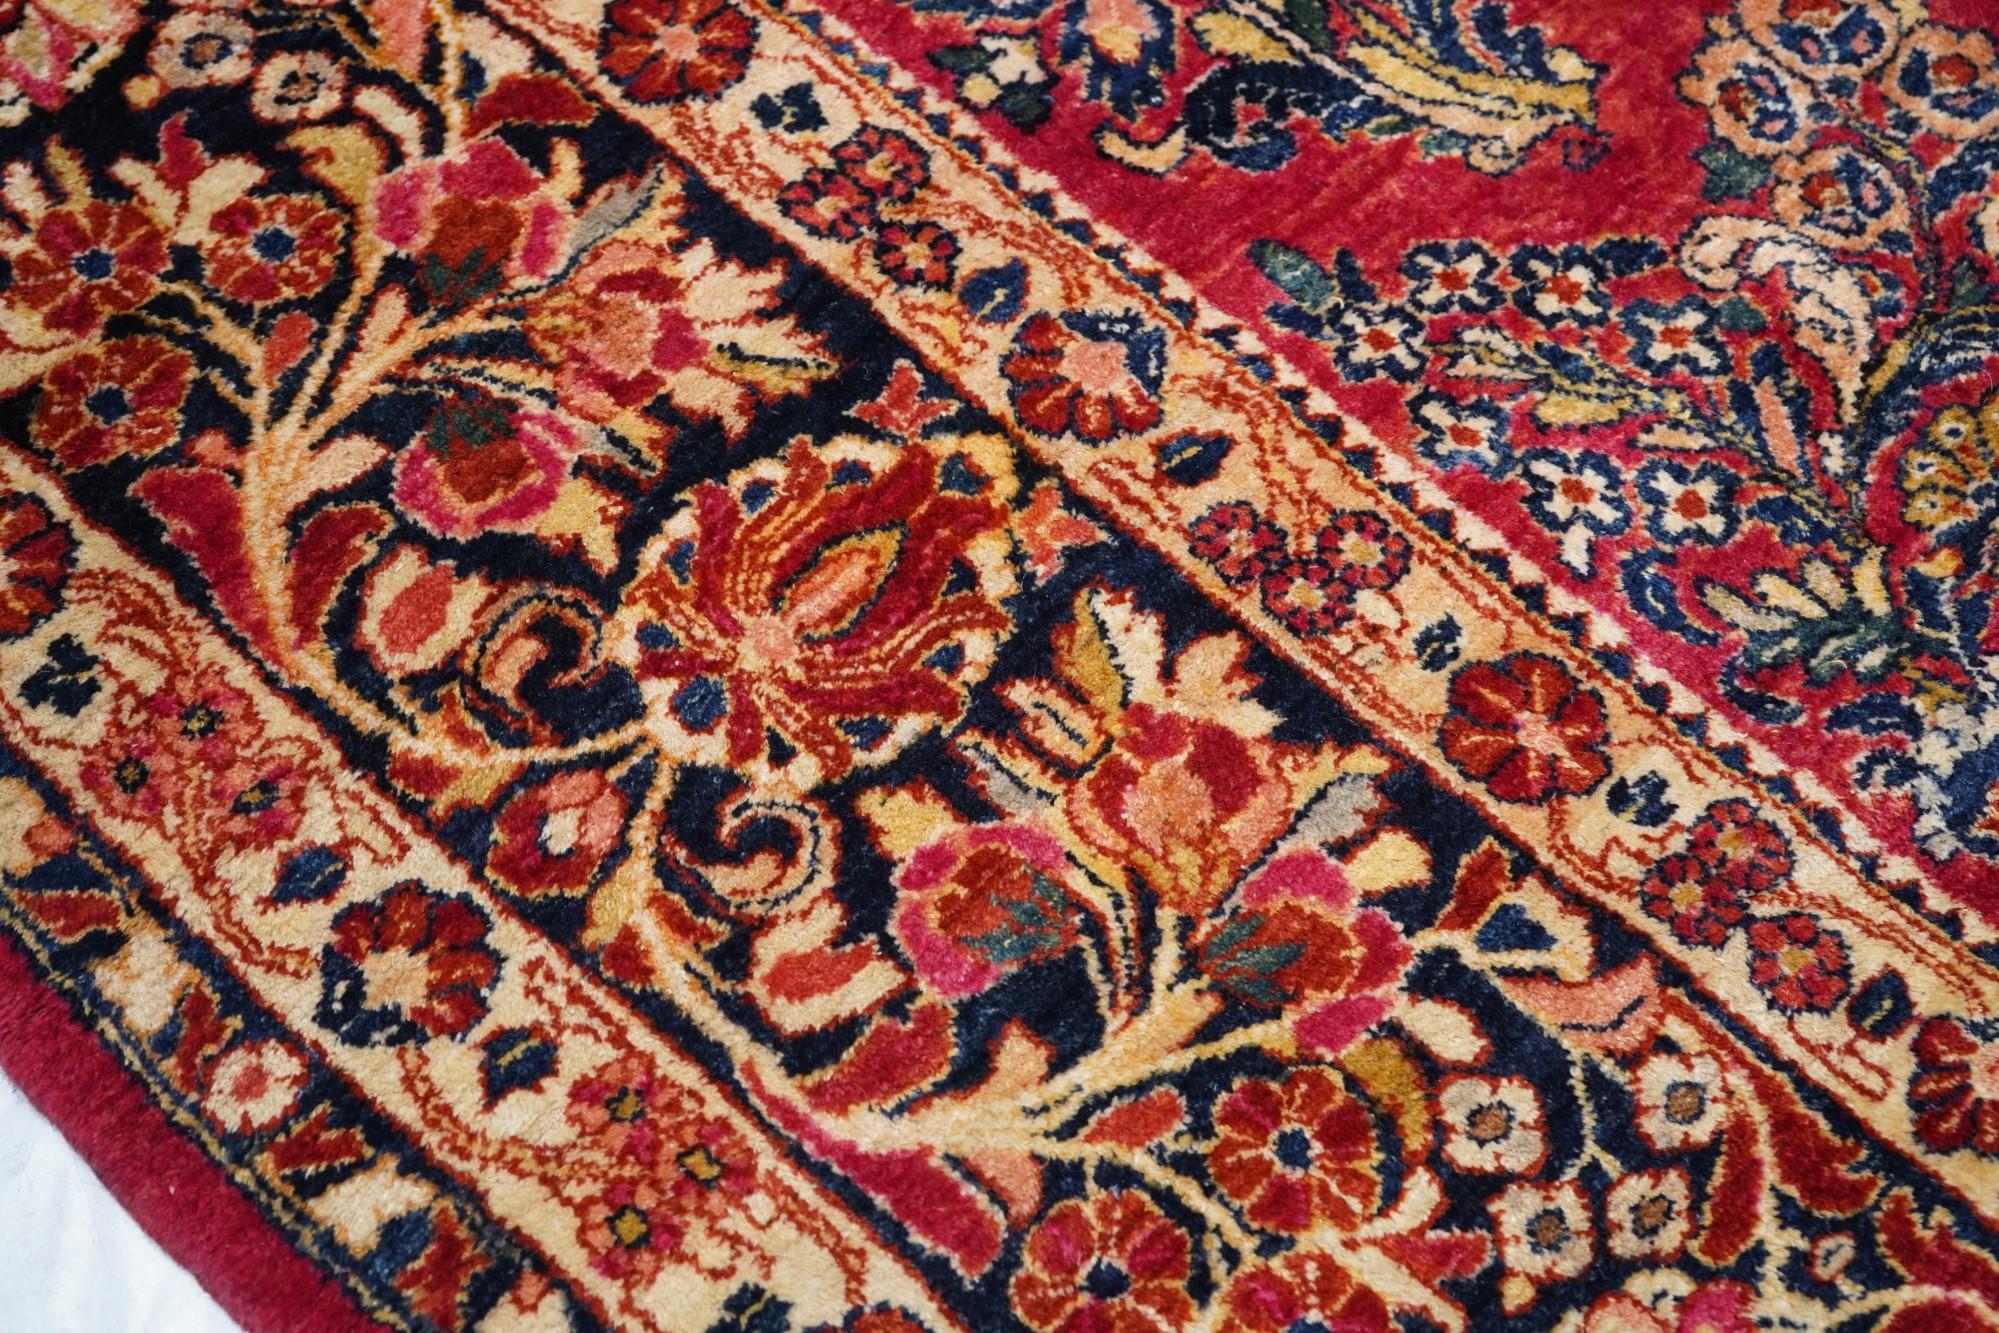 Antique Sarouk Rug 11'3'' x 18'1'' In Excellent Condition For Sale In New York, NY